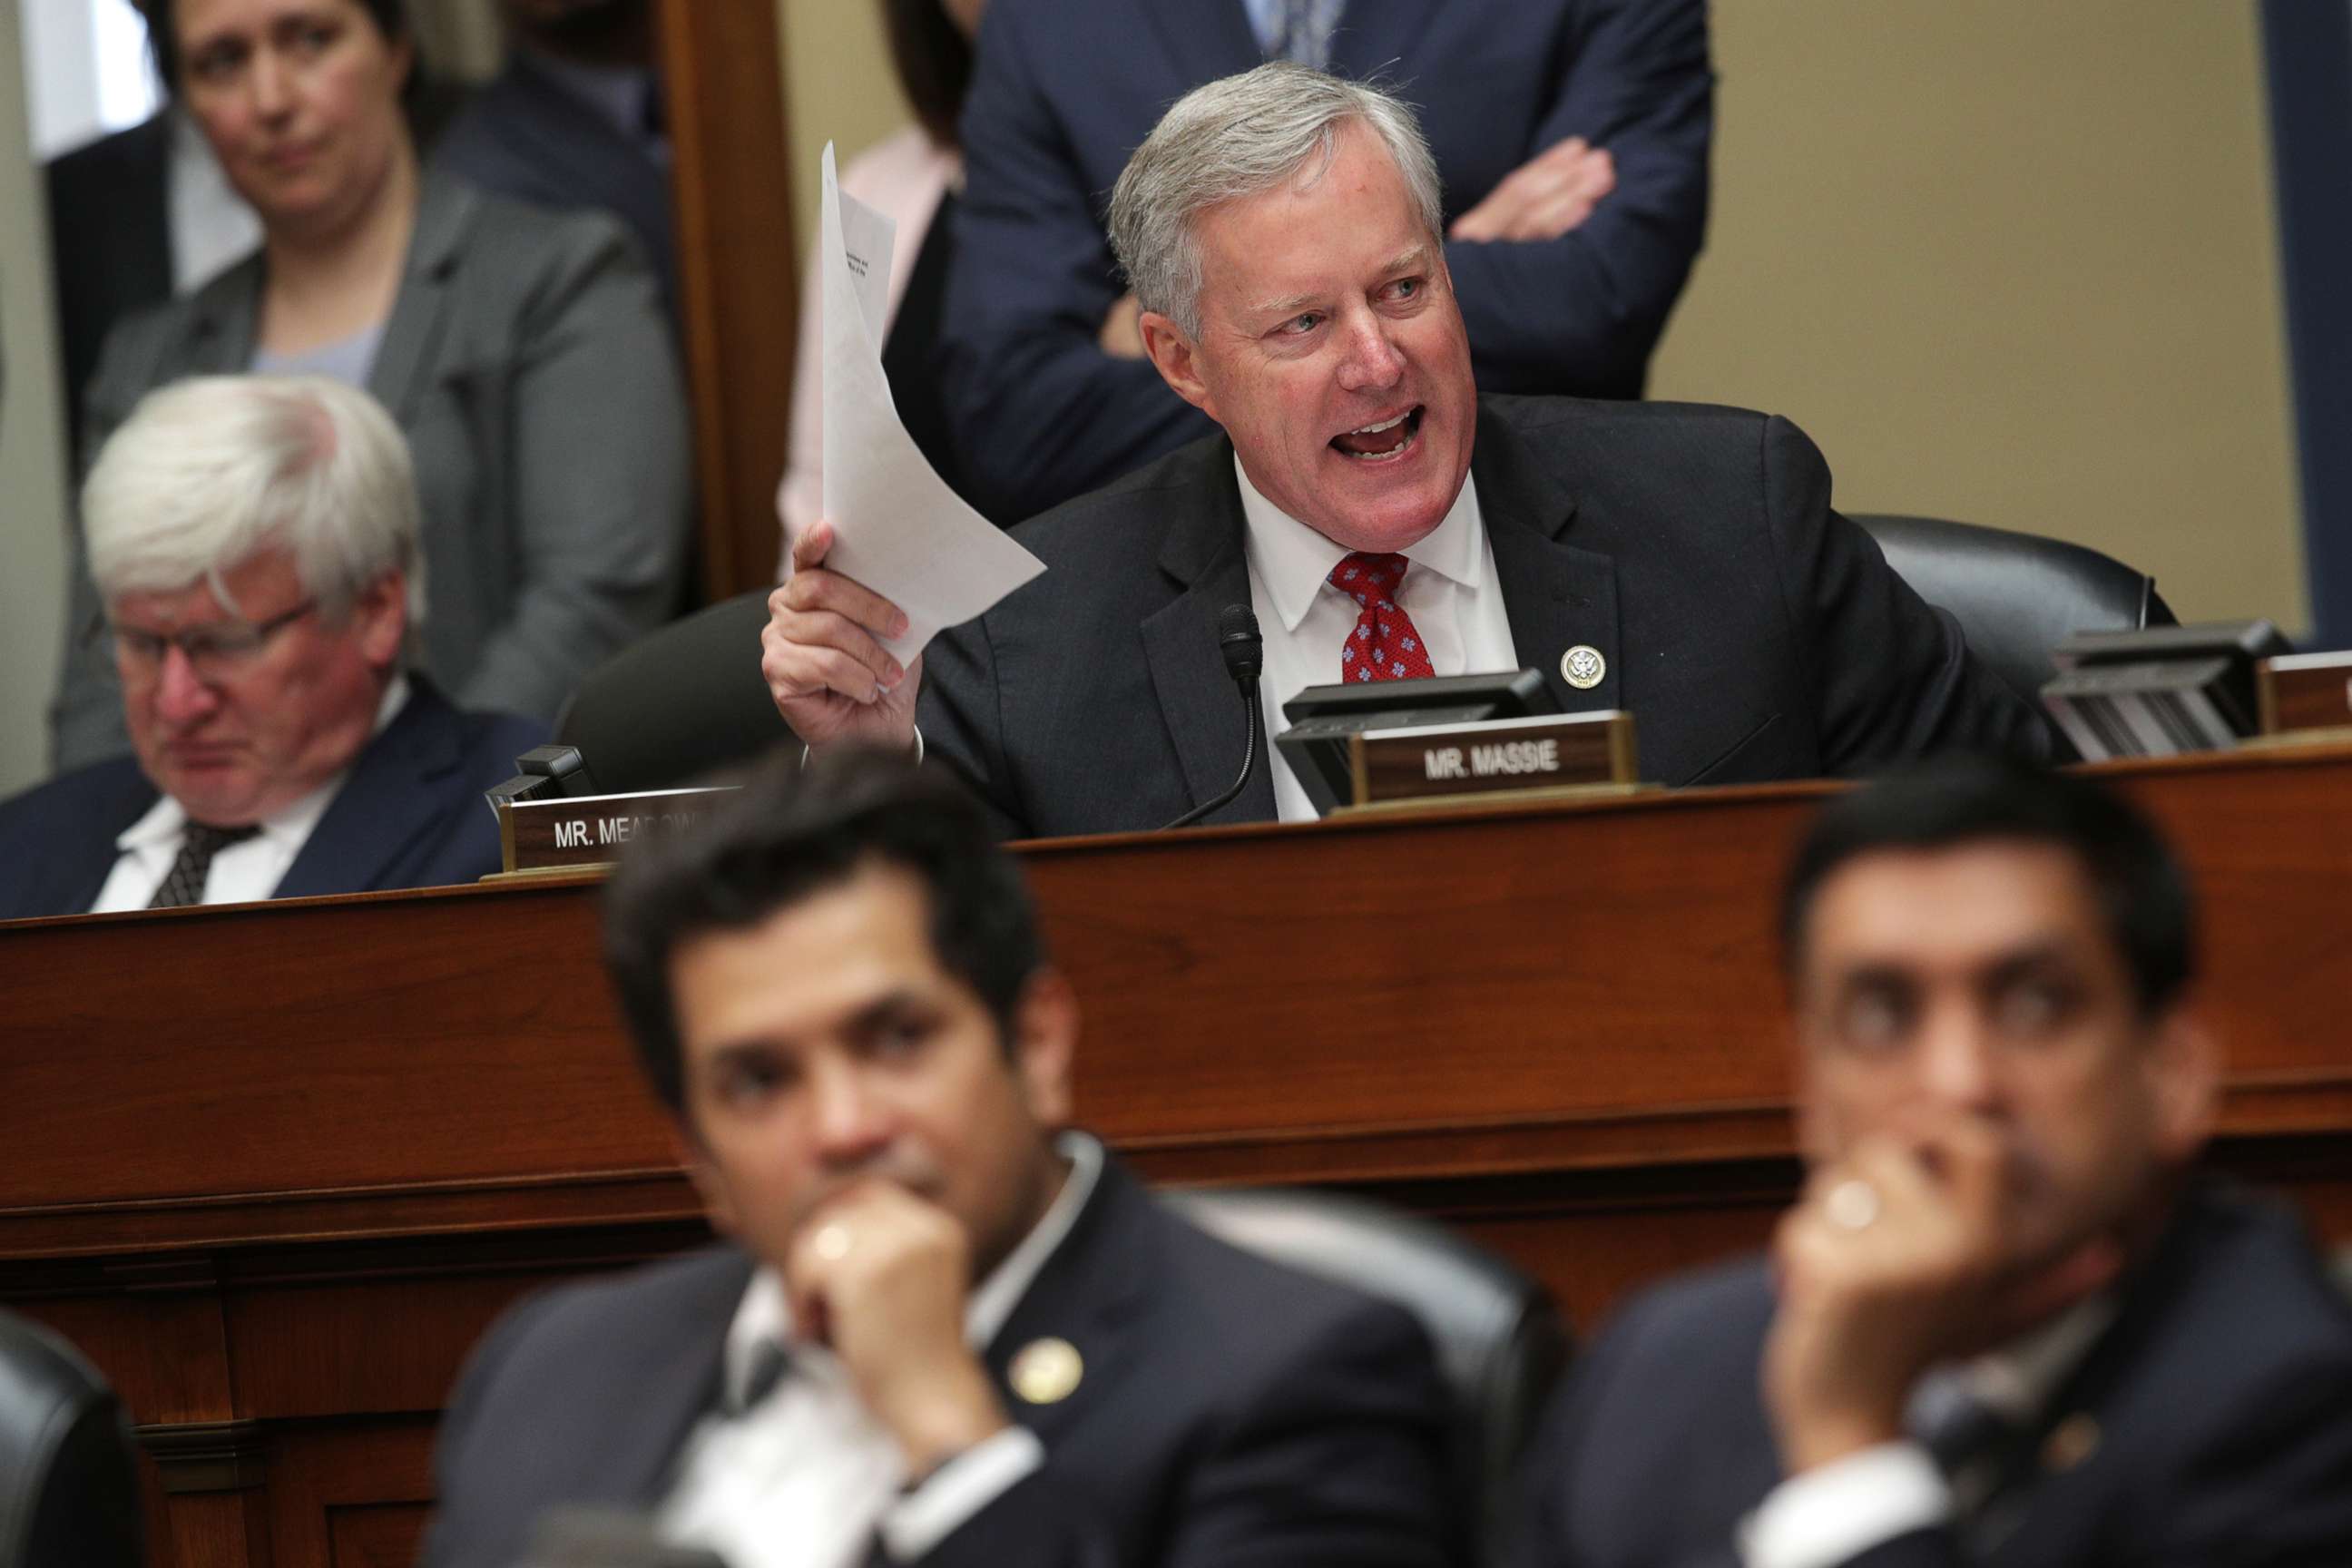 PHOTO: Rep. Mark Meadows speaks during a markup hearing before the House Oversight and Reform Committee June 26, 2019 on Capitol Hill in Washington, DC.